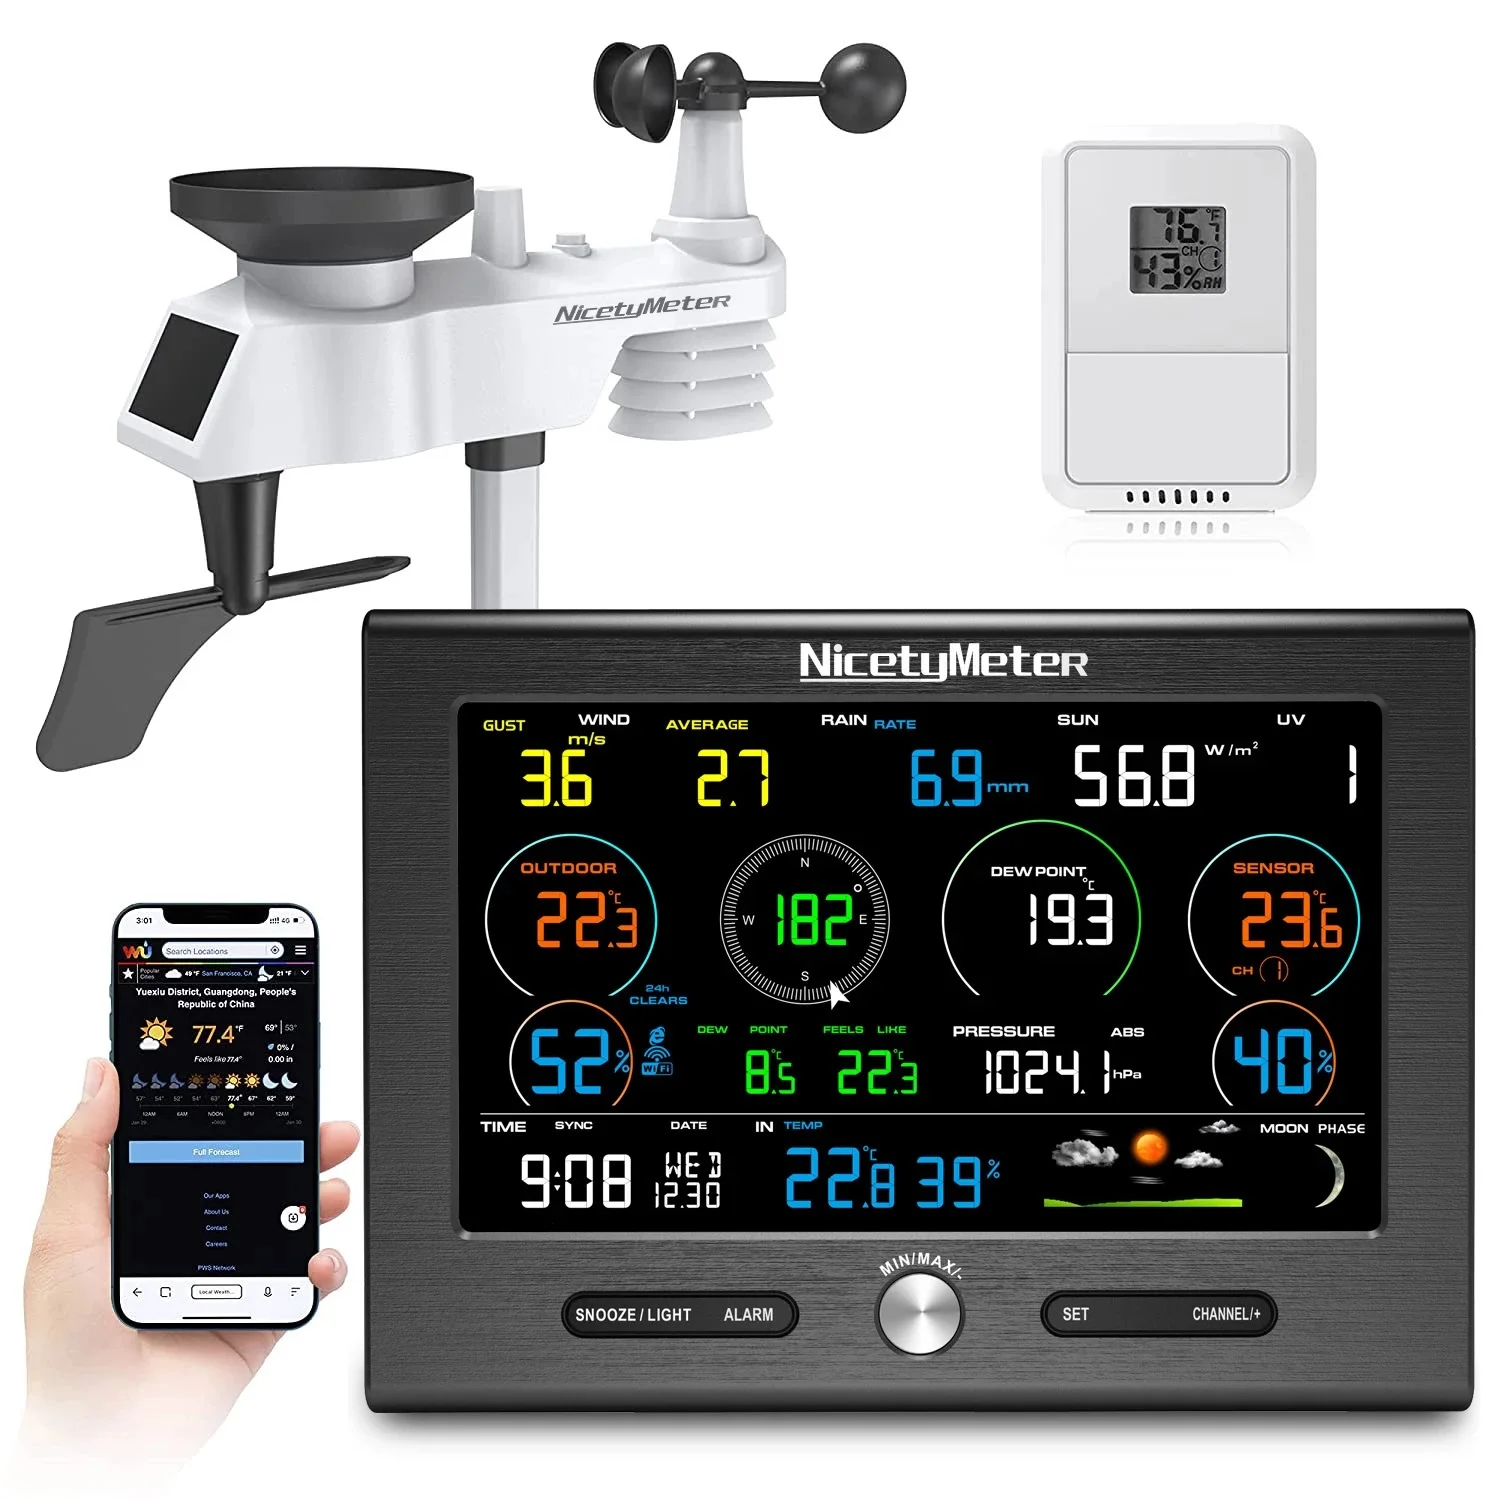 

0370 WiFi Weather Station 7 in 1 Rain Gauge Weather Forecast Weathercloud Temperature Humidity 8 Channels